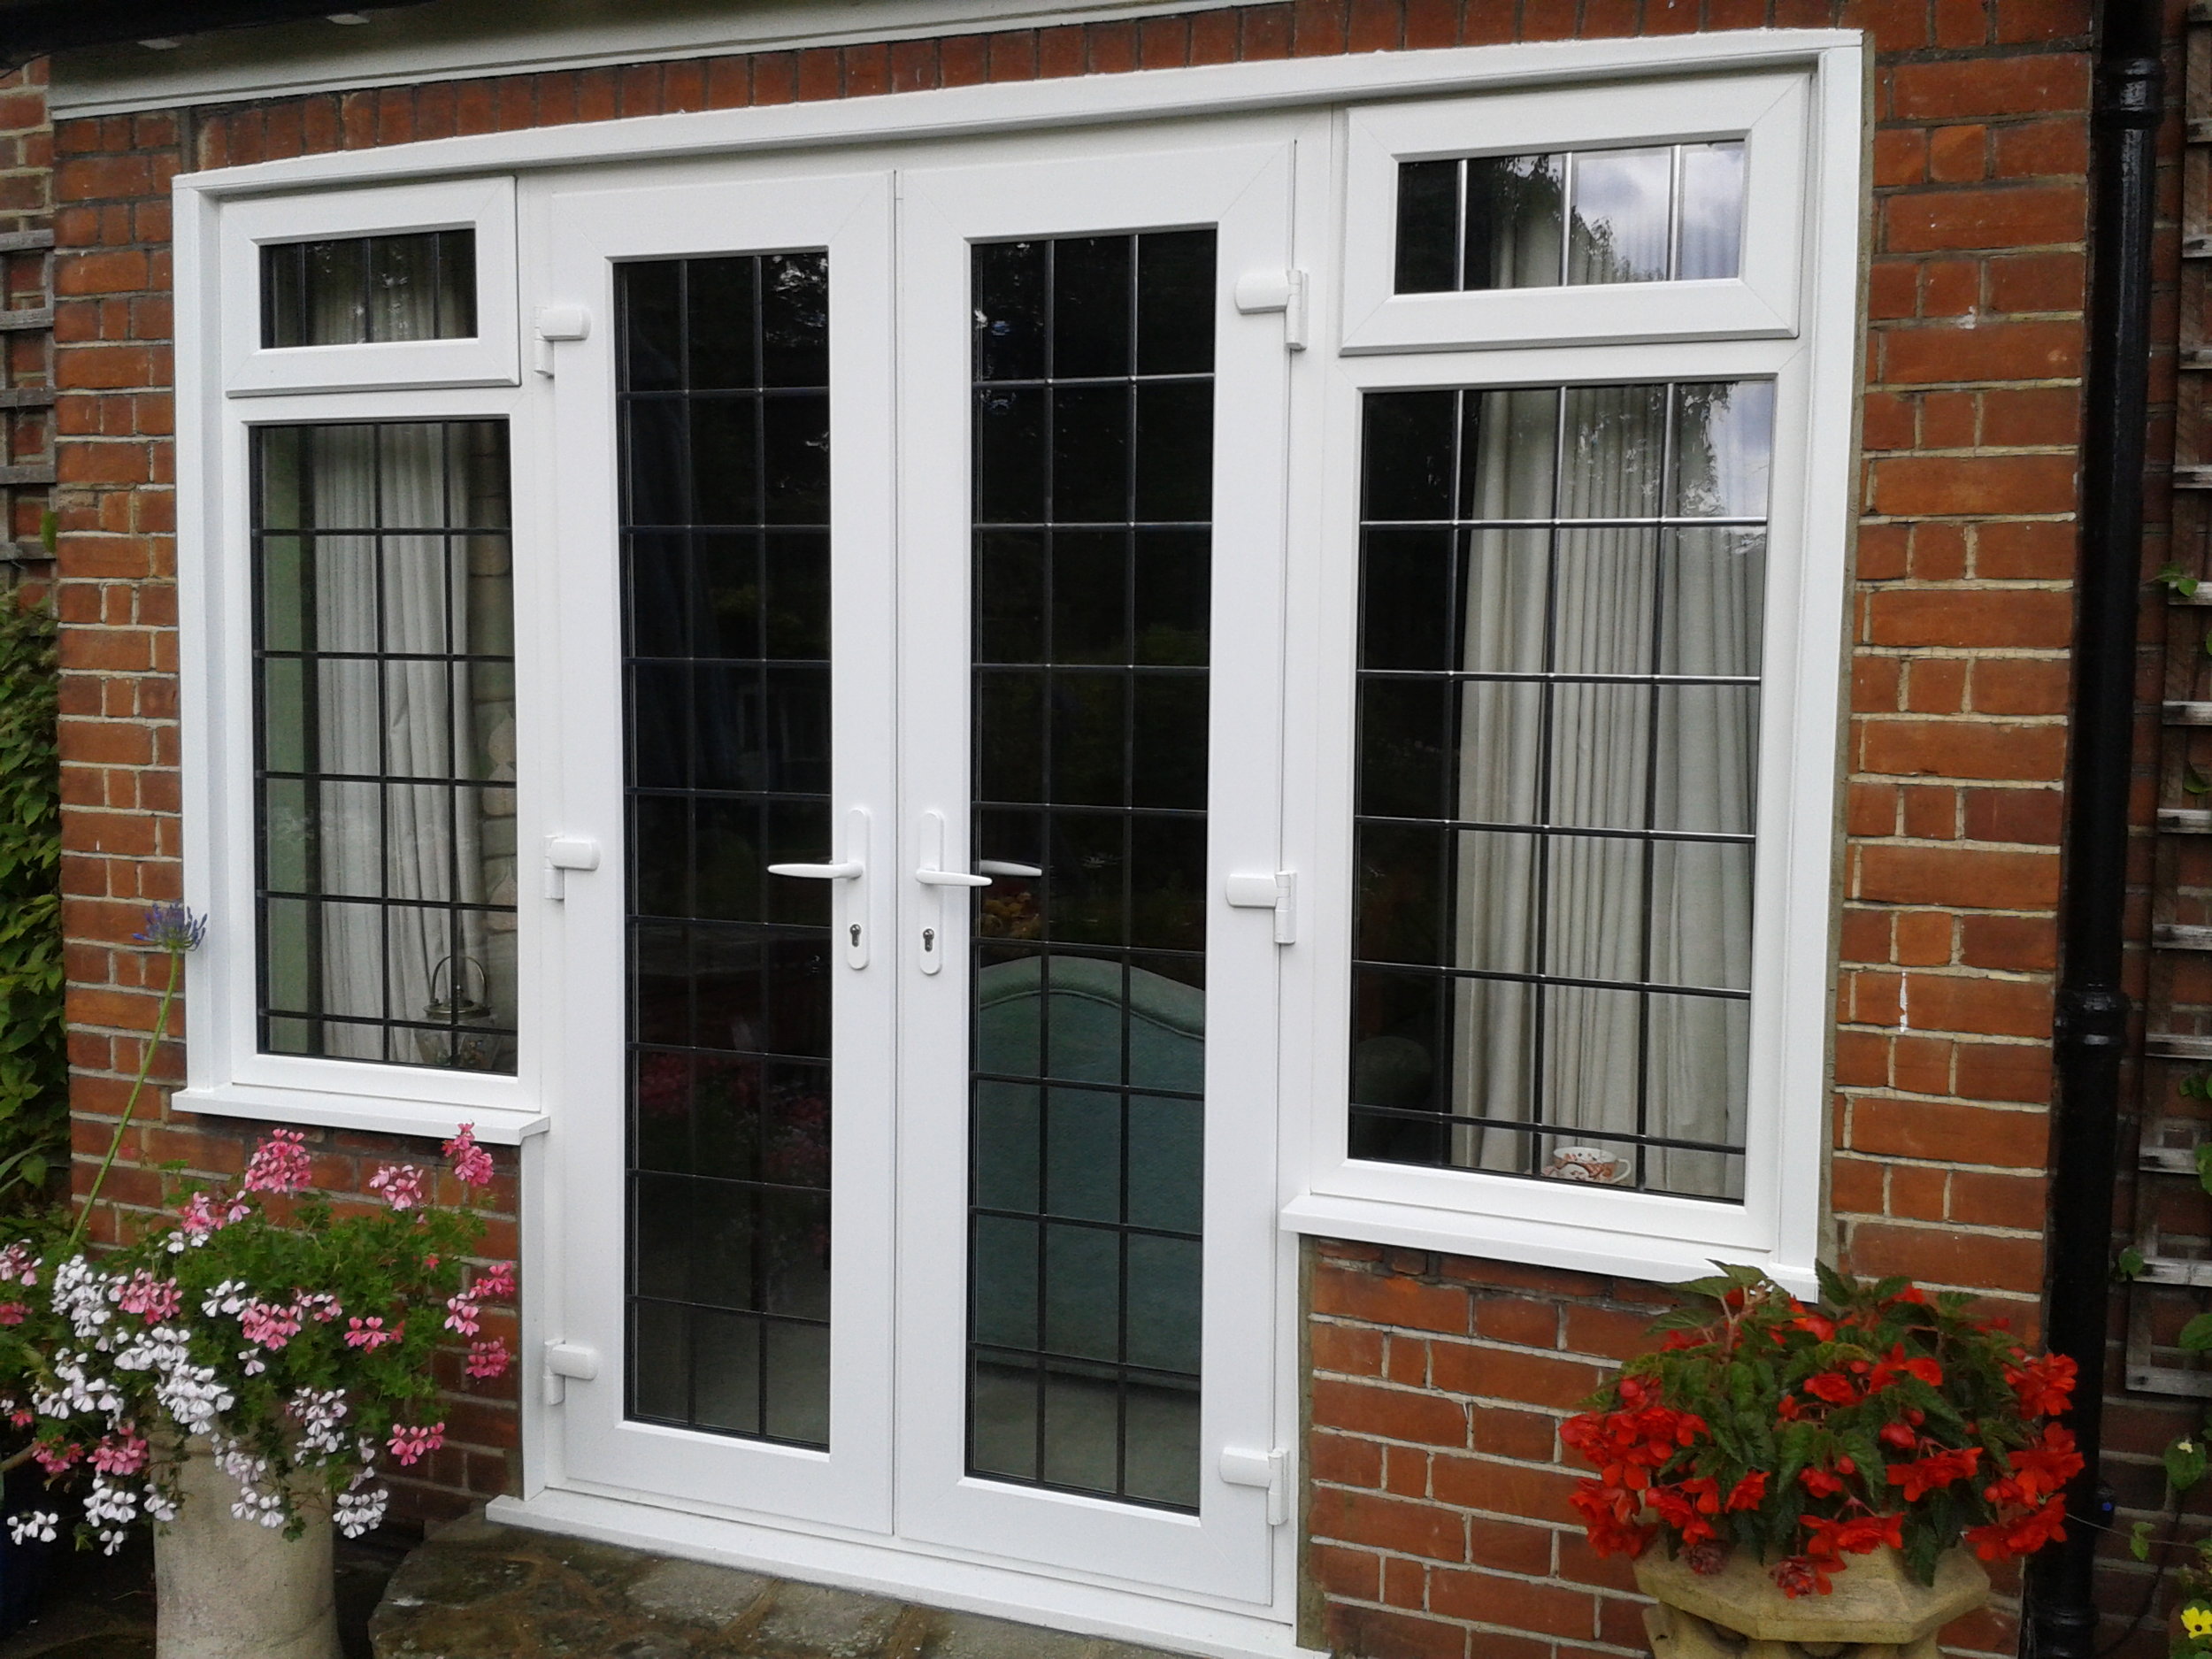 French doors with side windows that open